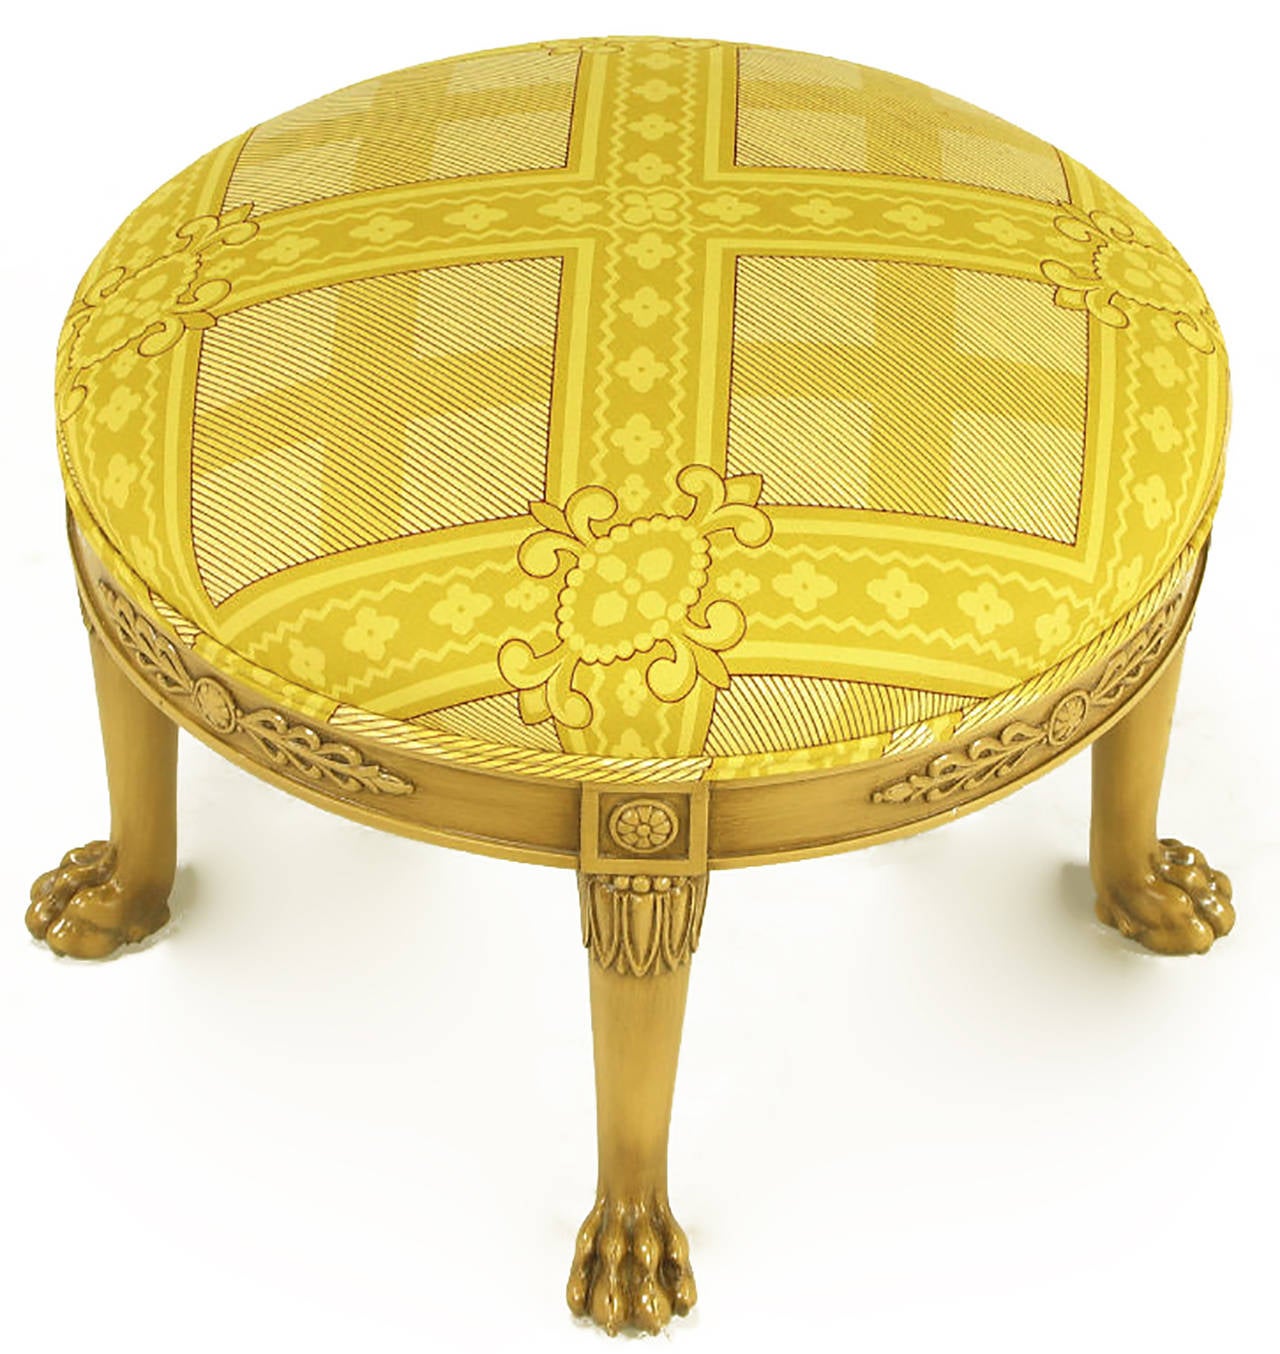 Round Empire style ottoman in bleached and glazed mahogany with lion paw feet. Legs have beaded and stylized acanthus leaf detailing. The carved and recessed apron features rosettes and horizontal plumed detail. Upholstered in a saffron print silk.